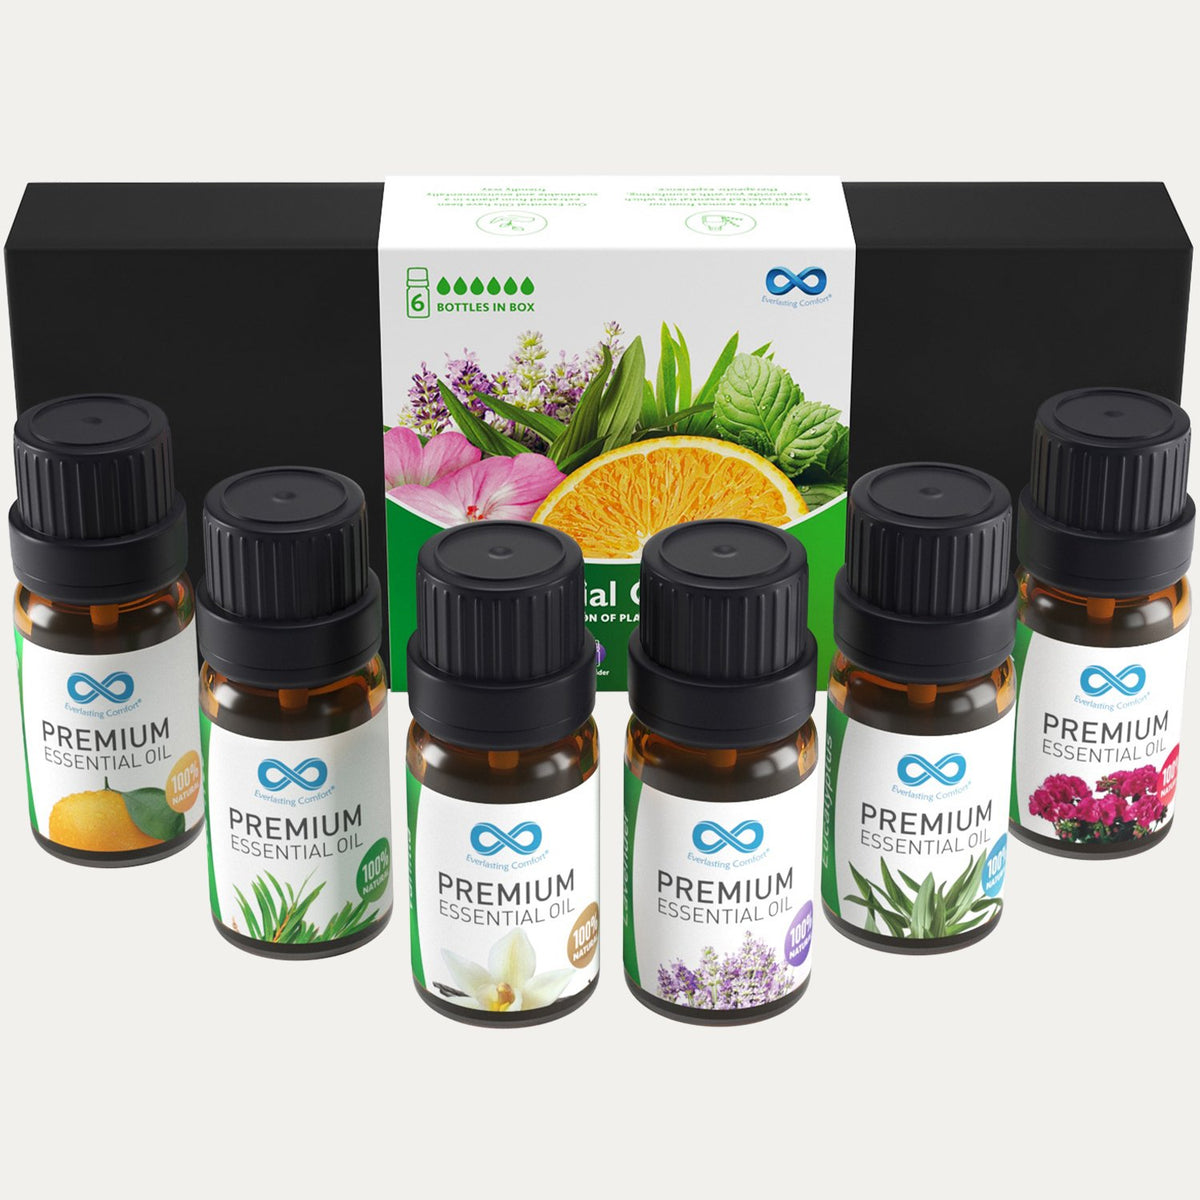 Calm Essential Oil Stress Relief Relaxation Gifts For Women Aromatherapy  Oils Body Care Drops for Fatigue